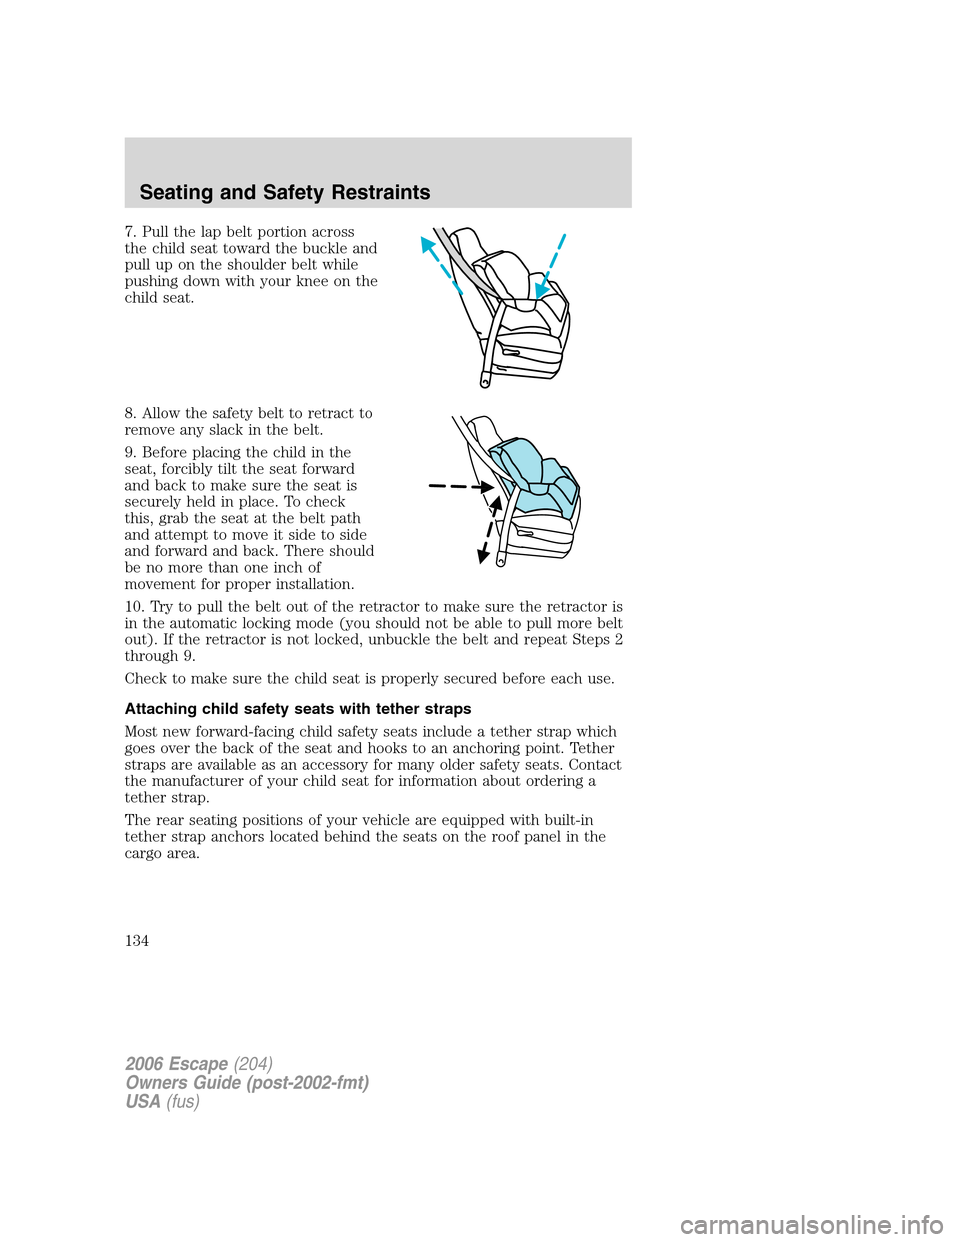 FORD ESCAPE 2006 1.G Owners Manual 7. Pull the lap belt portion across
the child seat toward the buckle and
pull up on the shoulder belt while
pushing down with your knee on the
child seat.
8. Allow the safety belt to retract to
remove